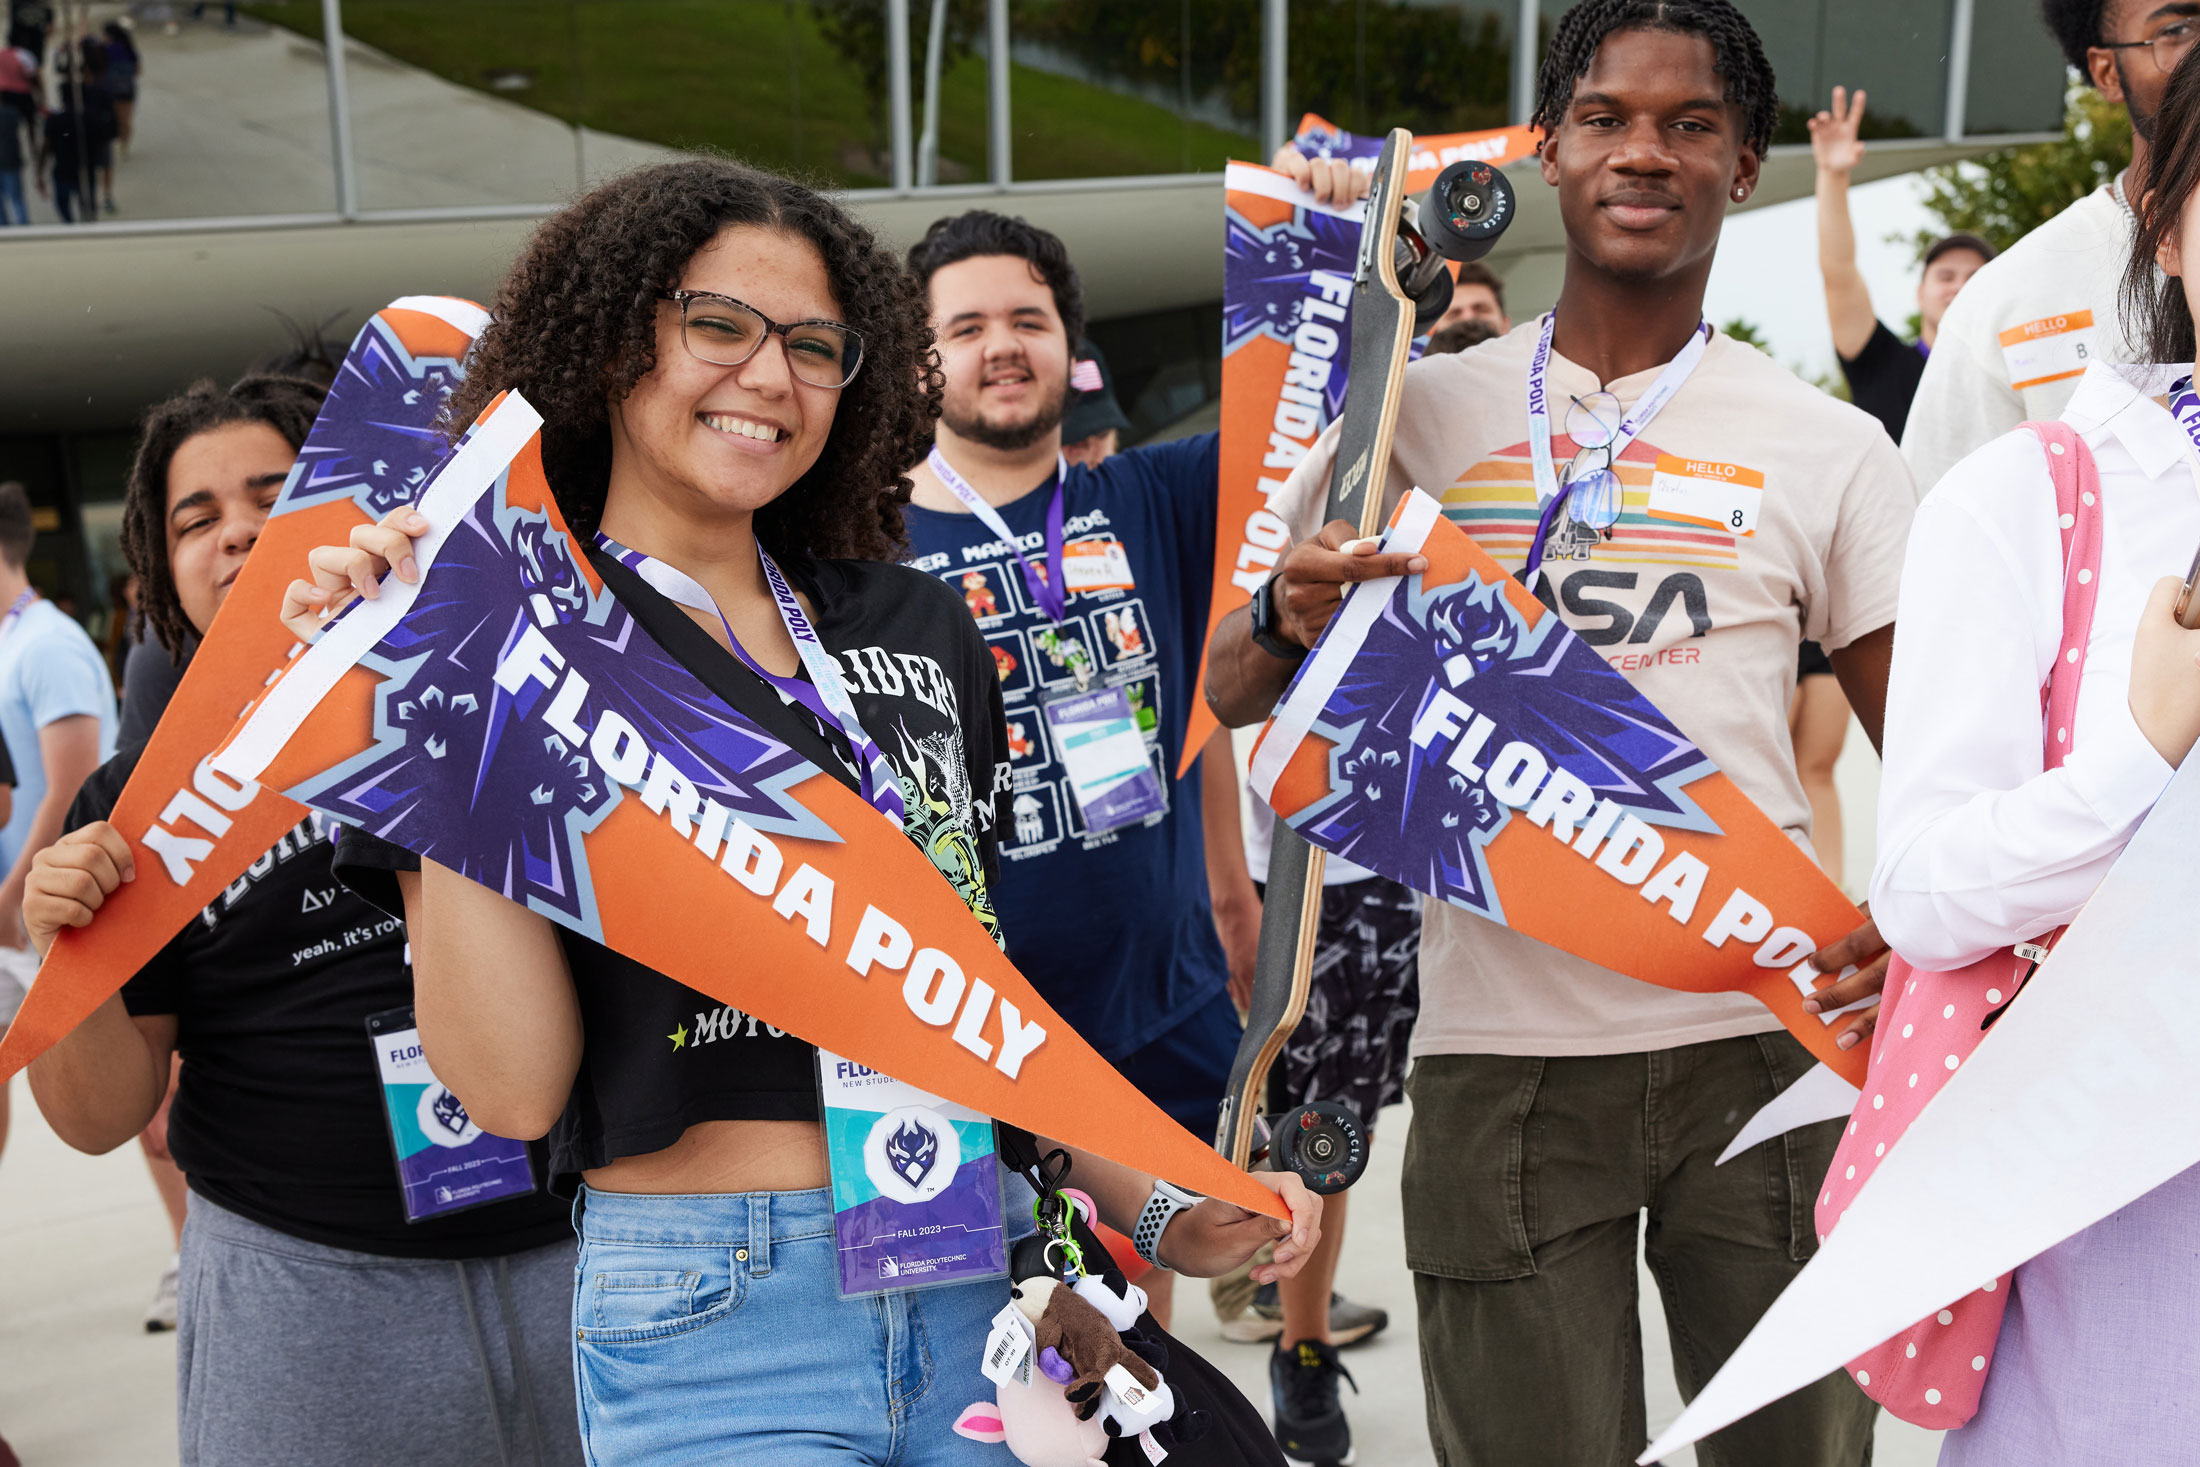 Florida Poly students show off their University pennants. 